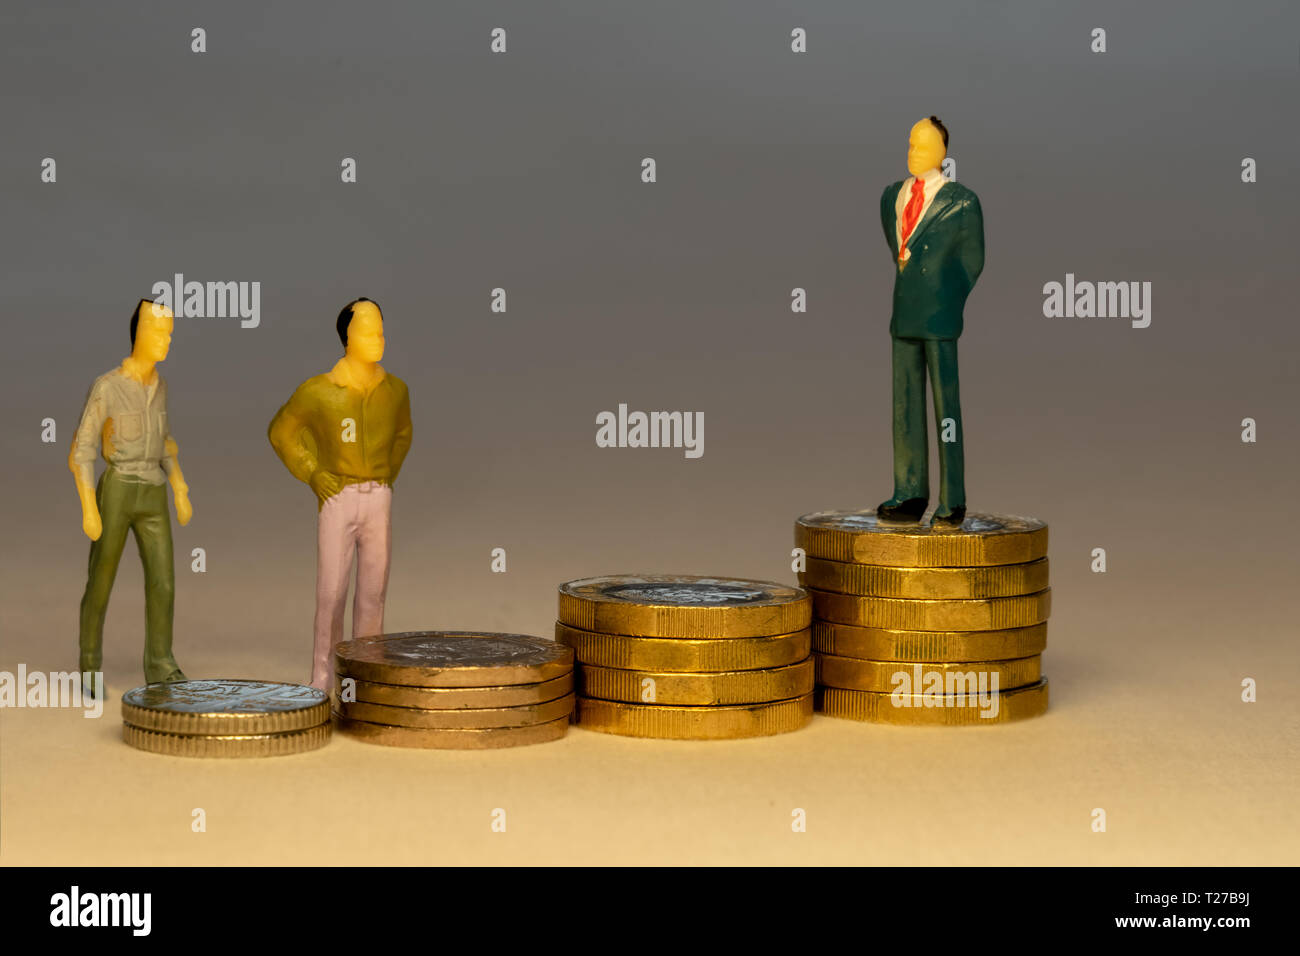 Ordinary people looking to business man standing on top of increasing piles of gold coins. Business career concept. Stock Photo